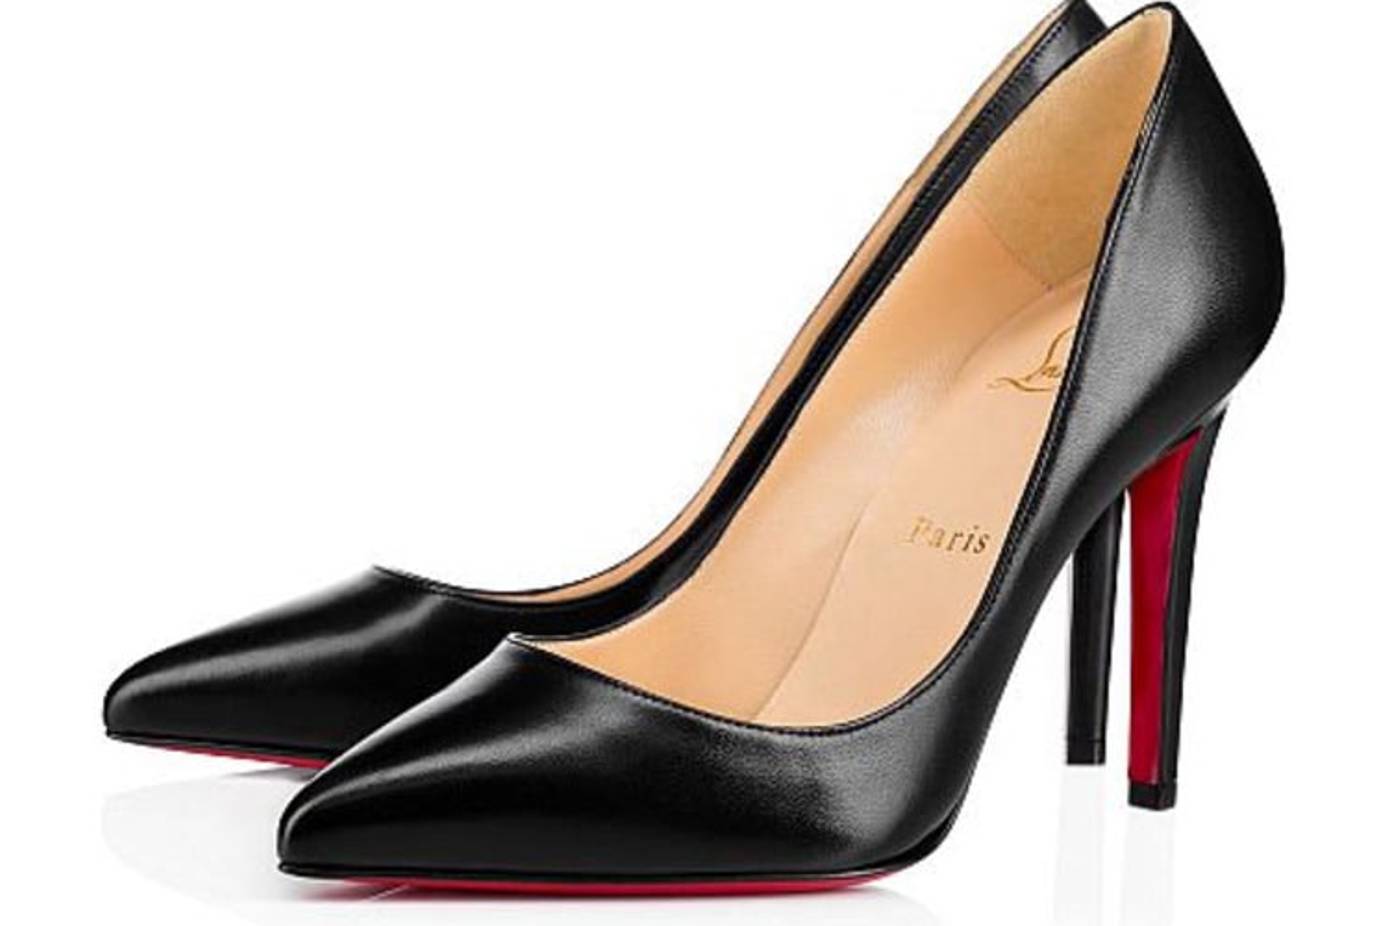 Goss-IPgirl: Louboutin Loses Yet Another Trademark Case Over Red-Soled Shoes